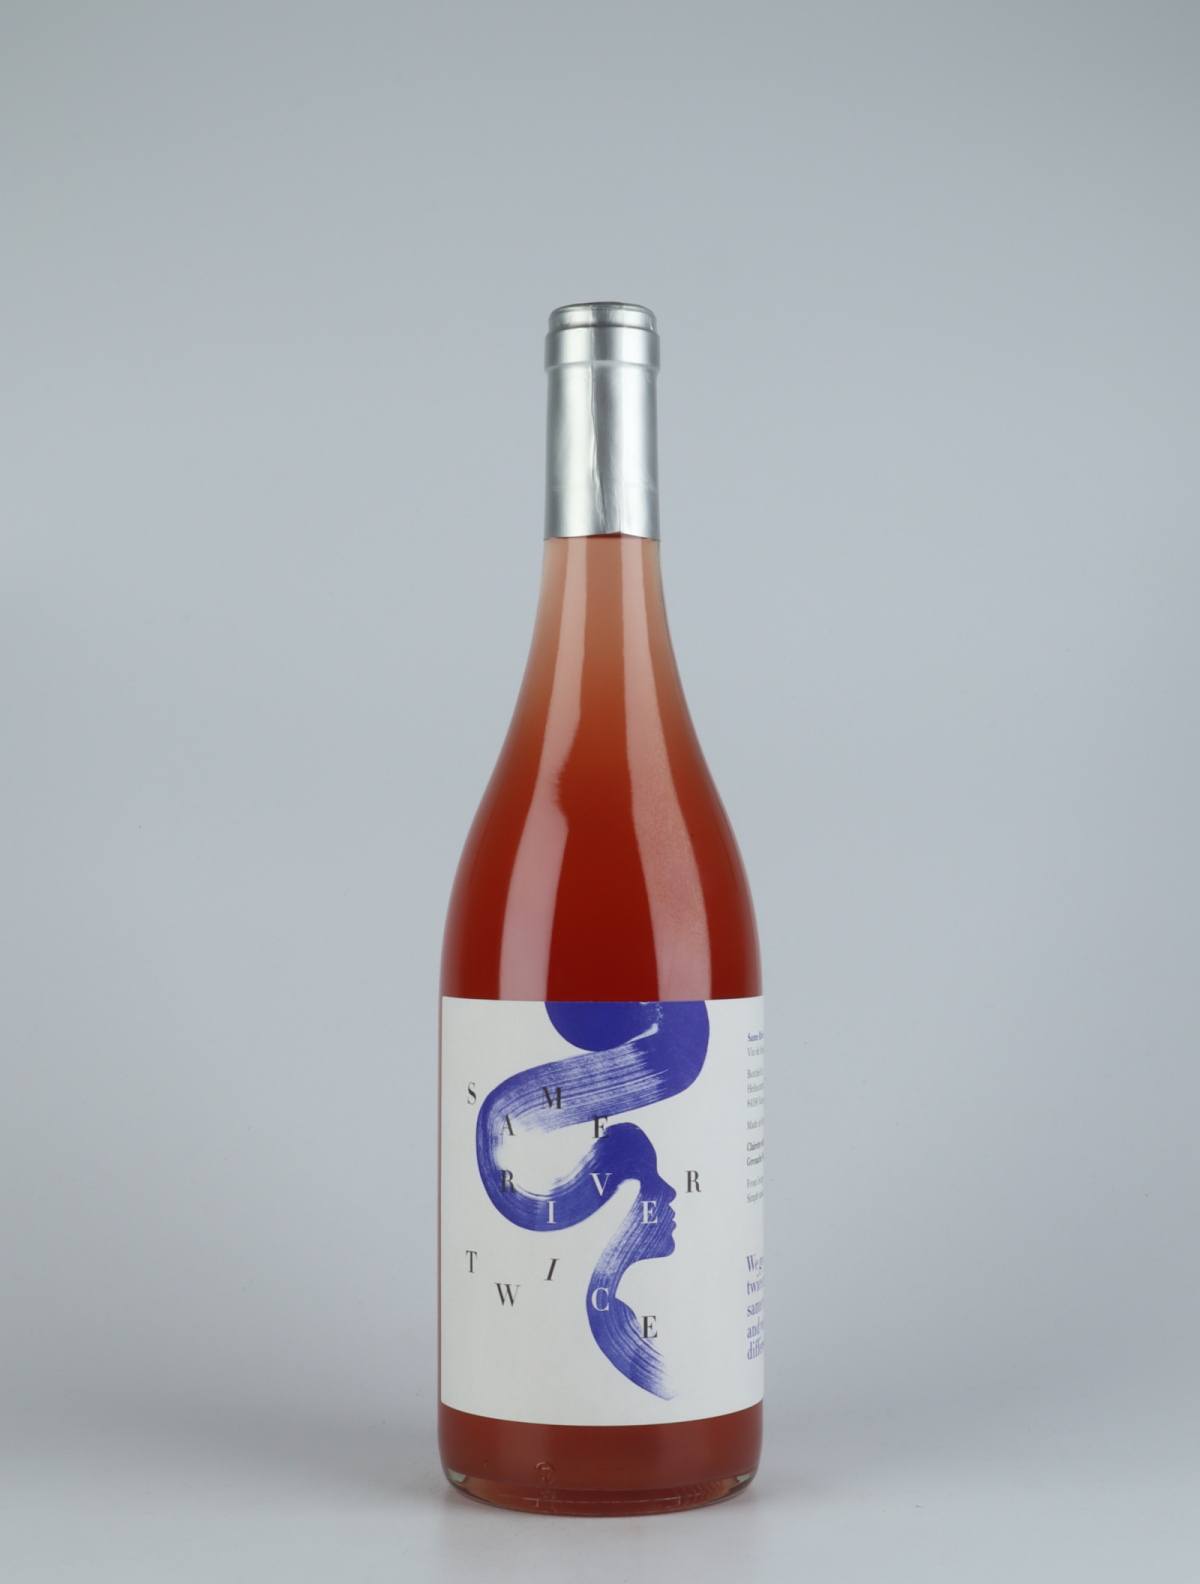 A bottle 2020 Same River Twice Rosé Rosé from Heliocentric Wines, Rhône in France